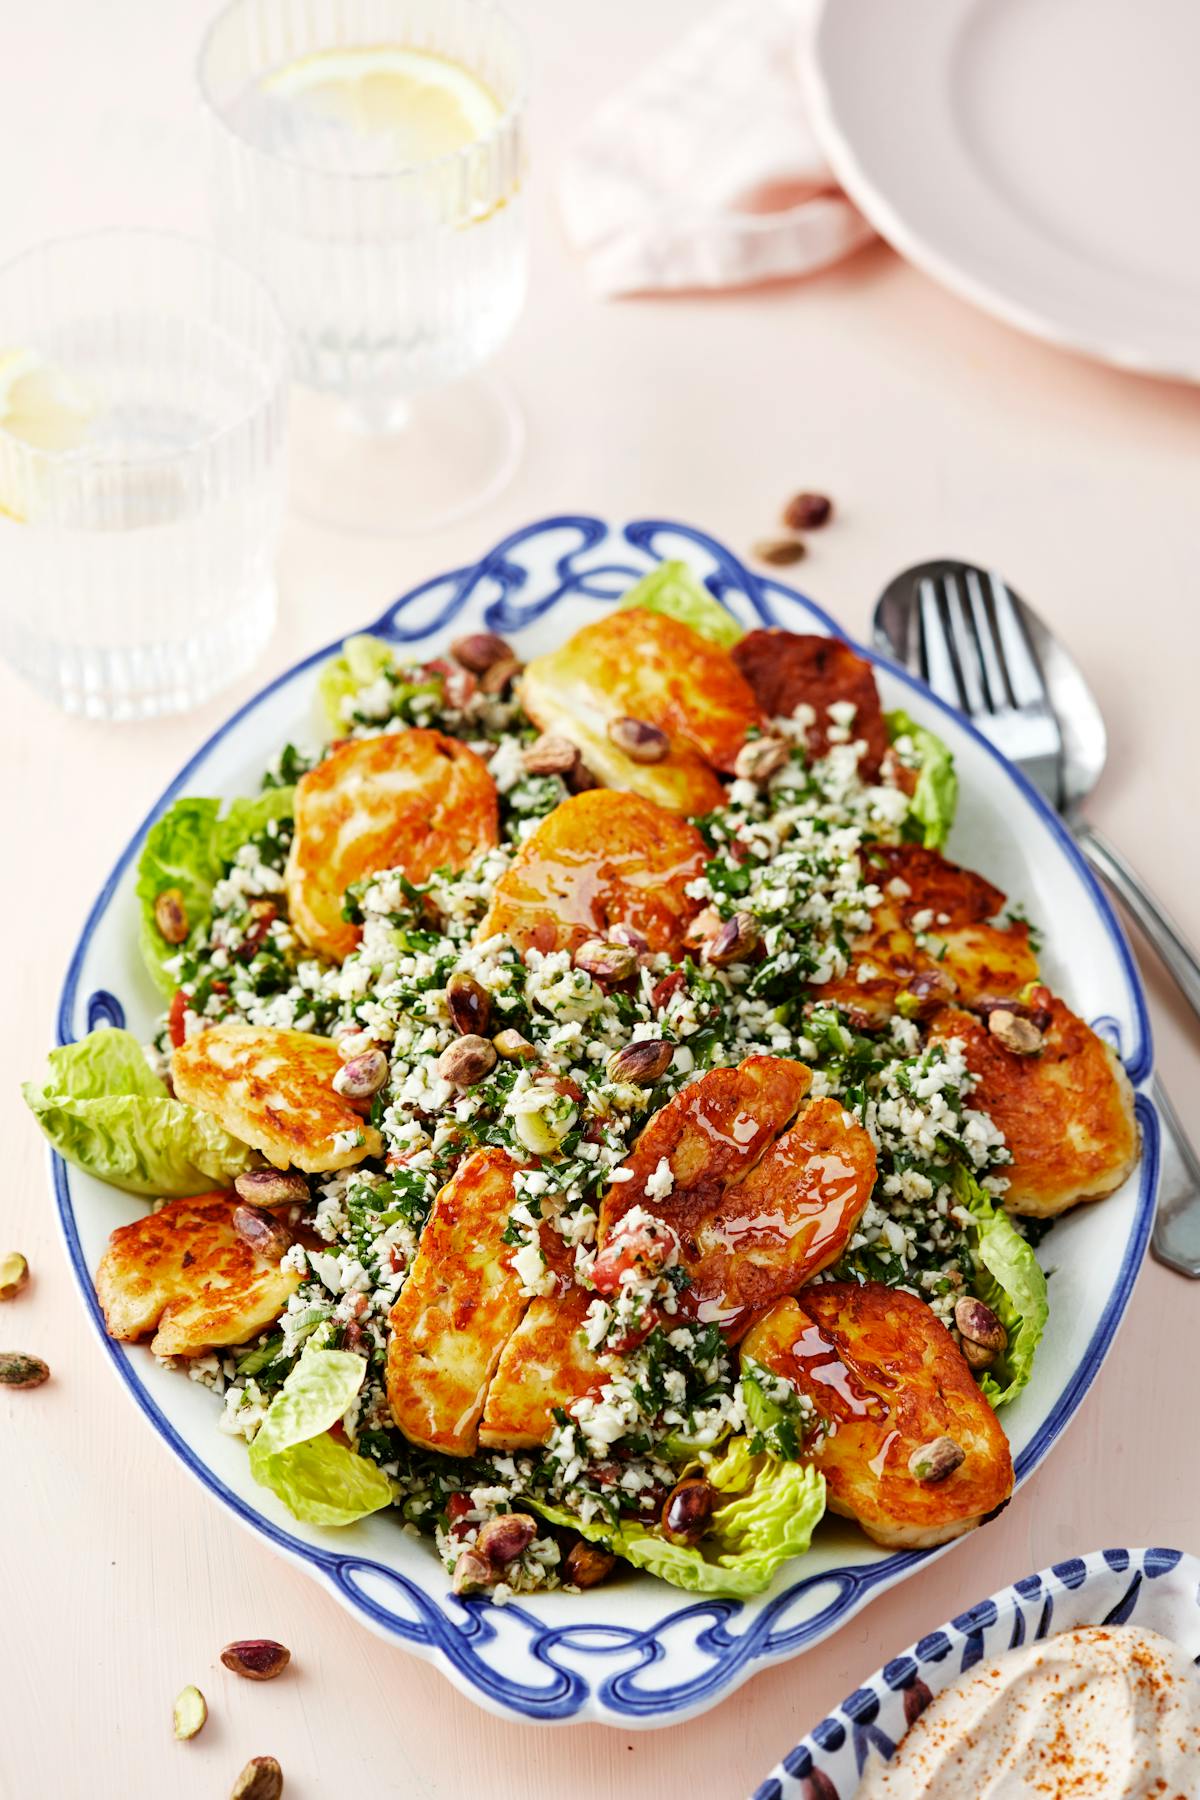 Low carb cauliflower tabbouleh with halloumi cheese